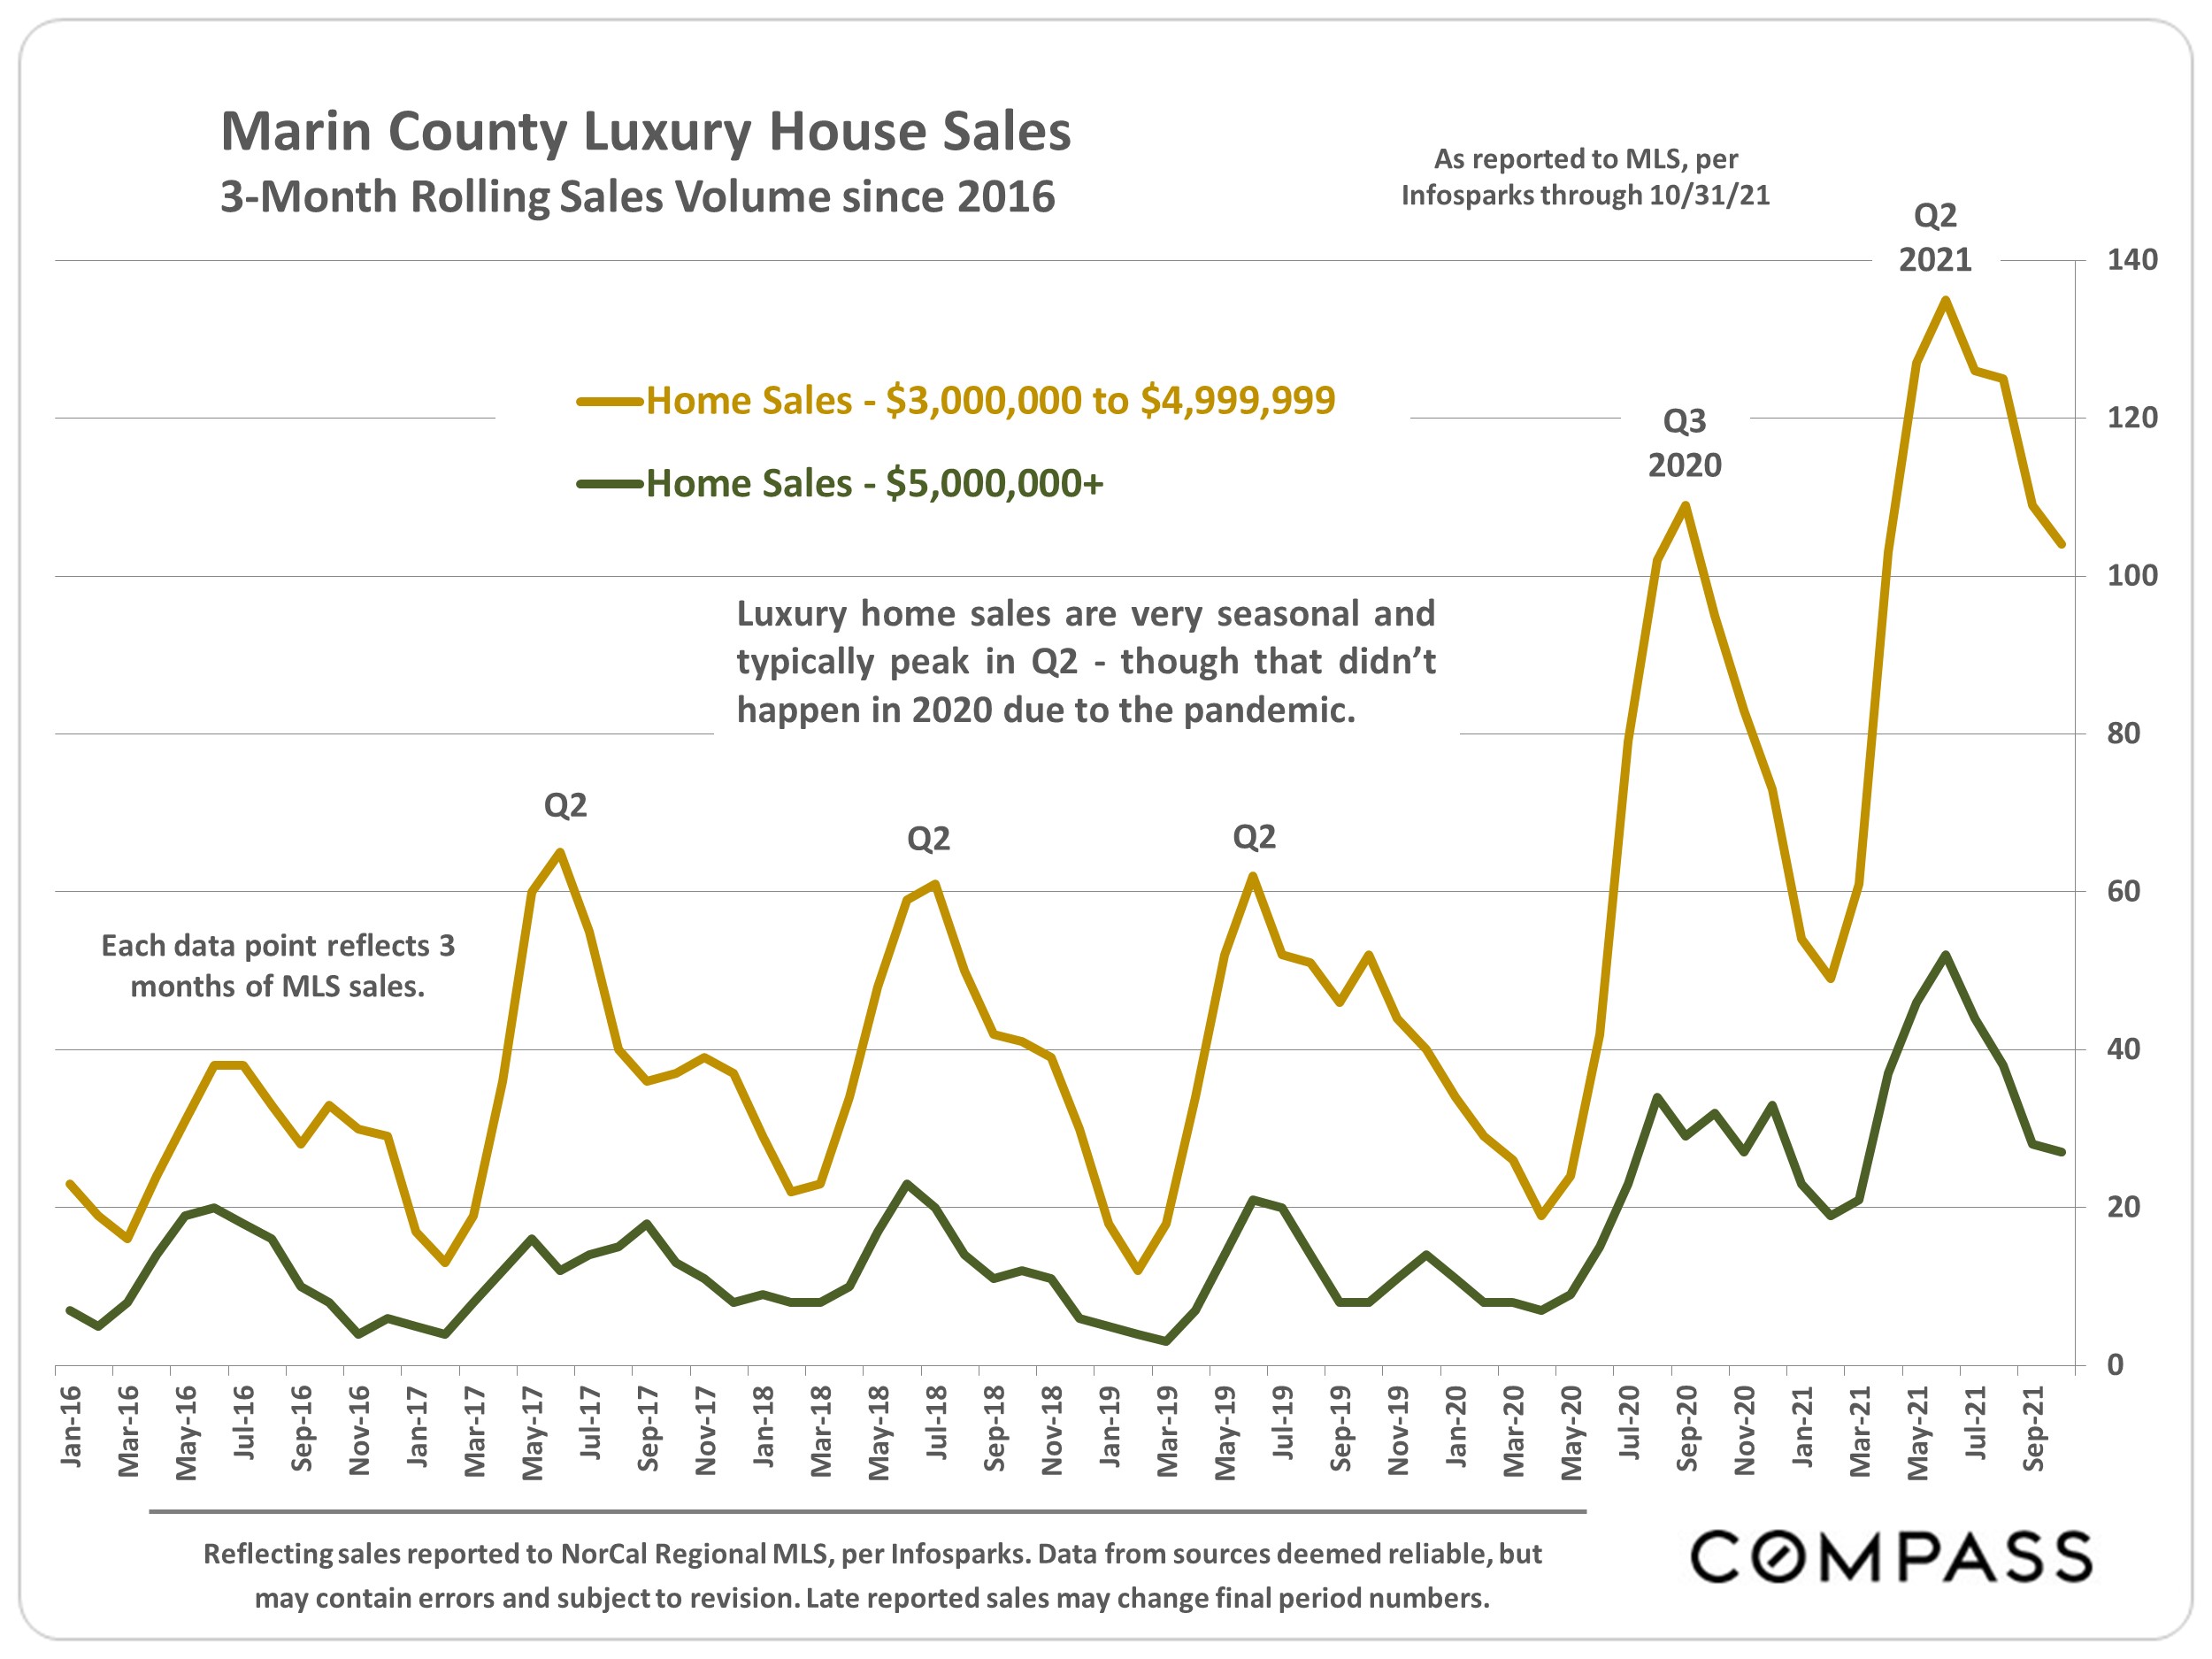 line graphs of marin county luxury house sales comparing homes $3M - $5M and above $5M